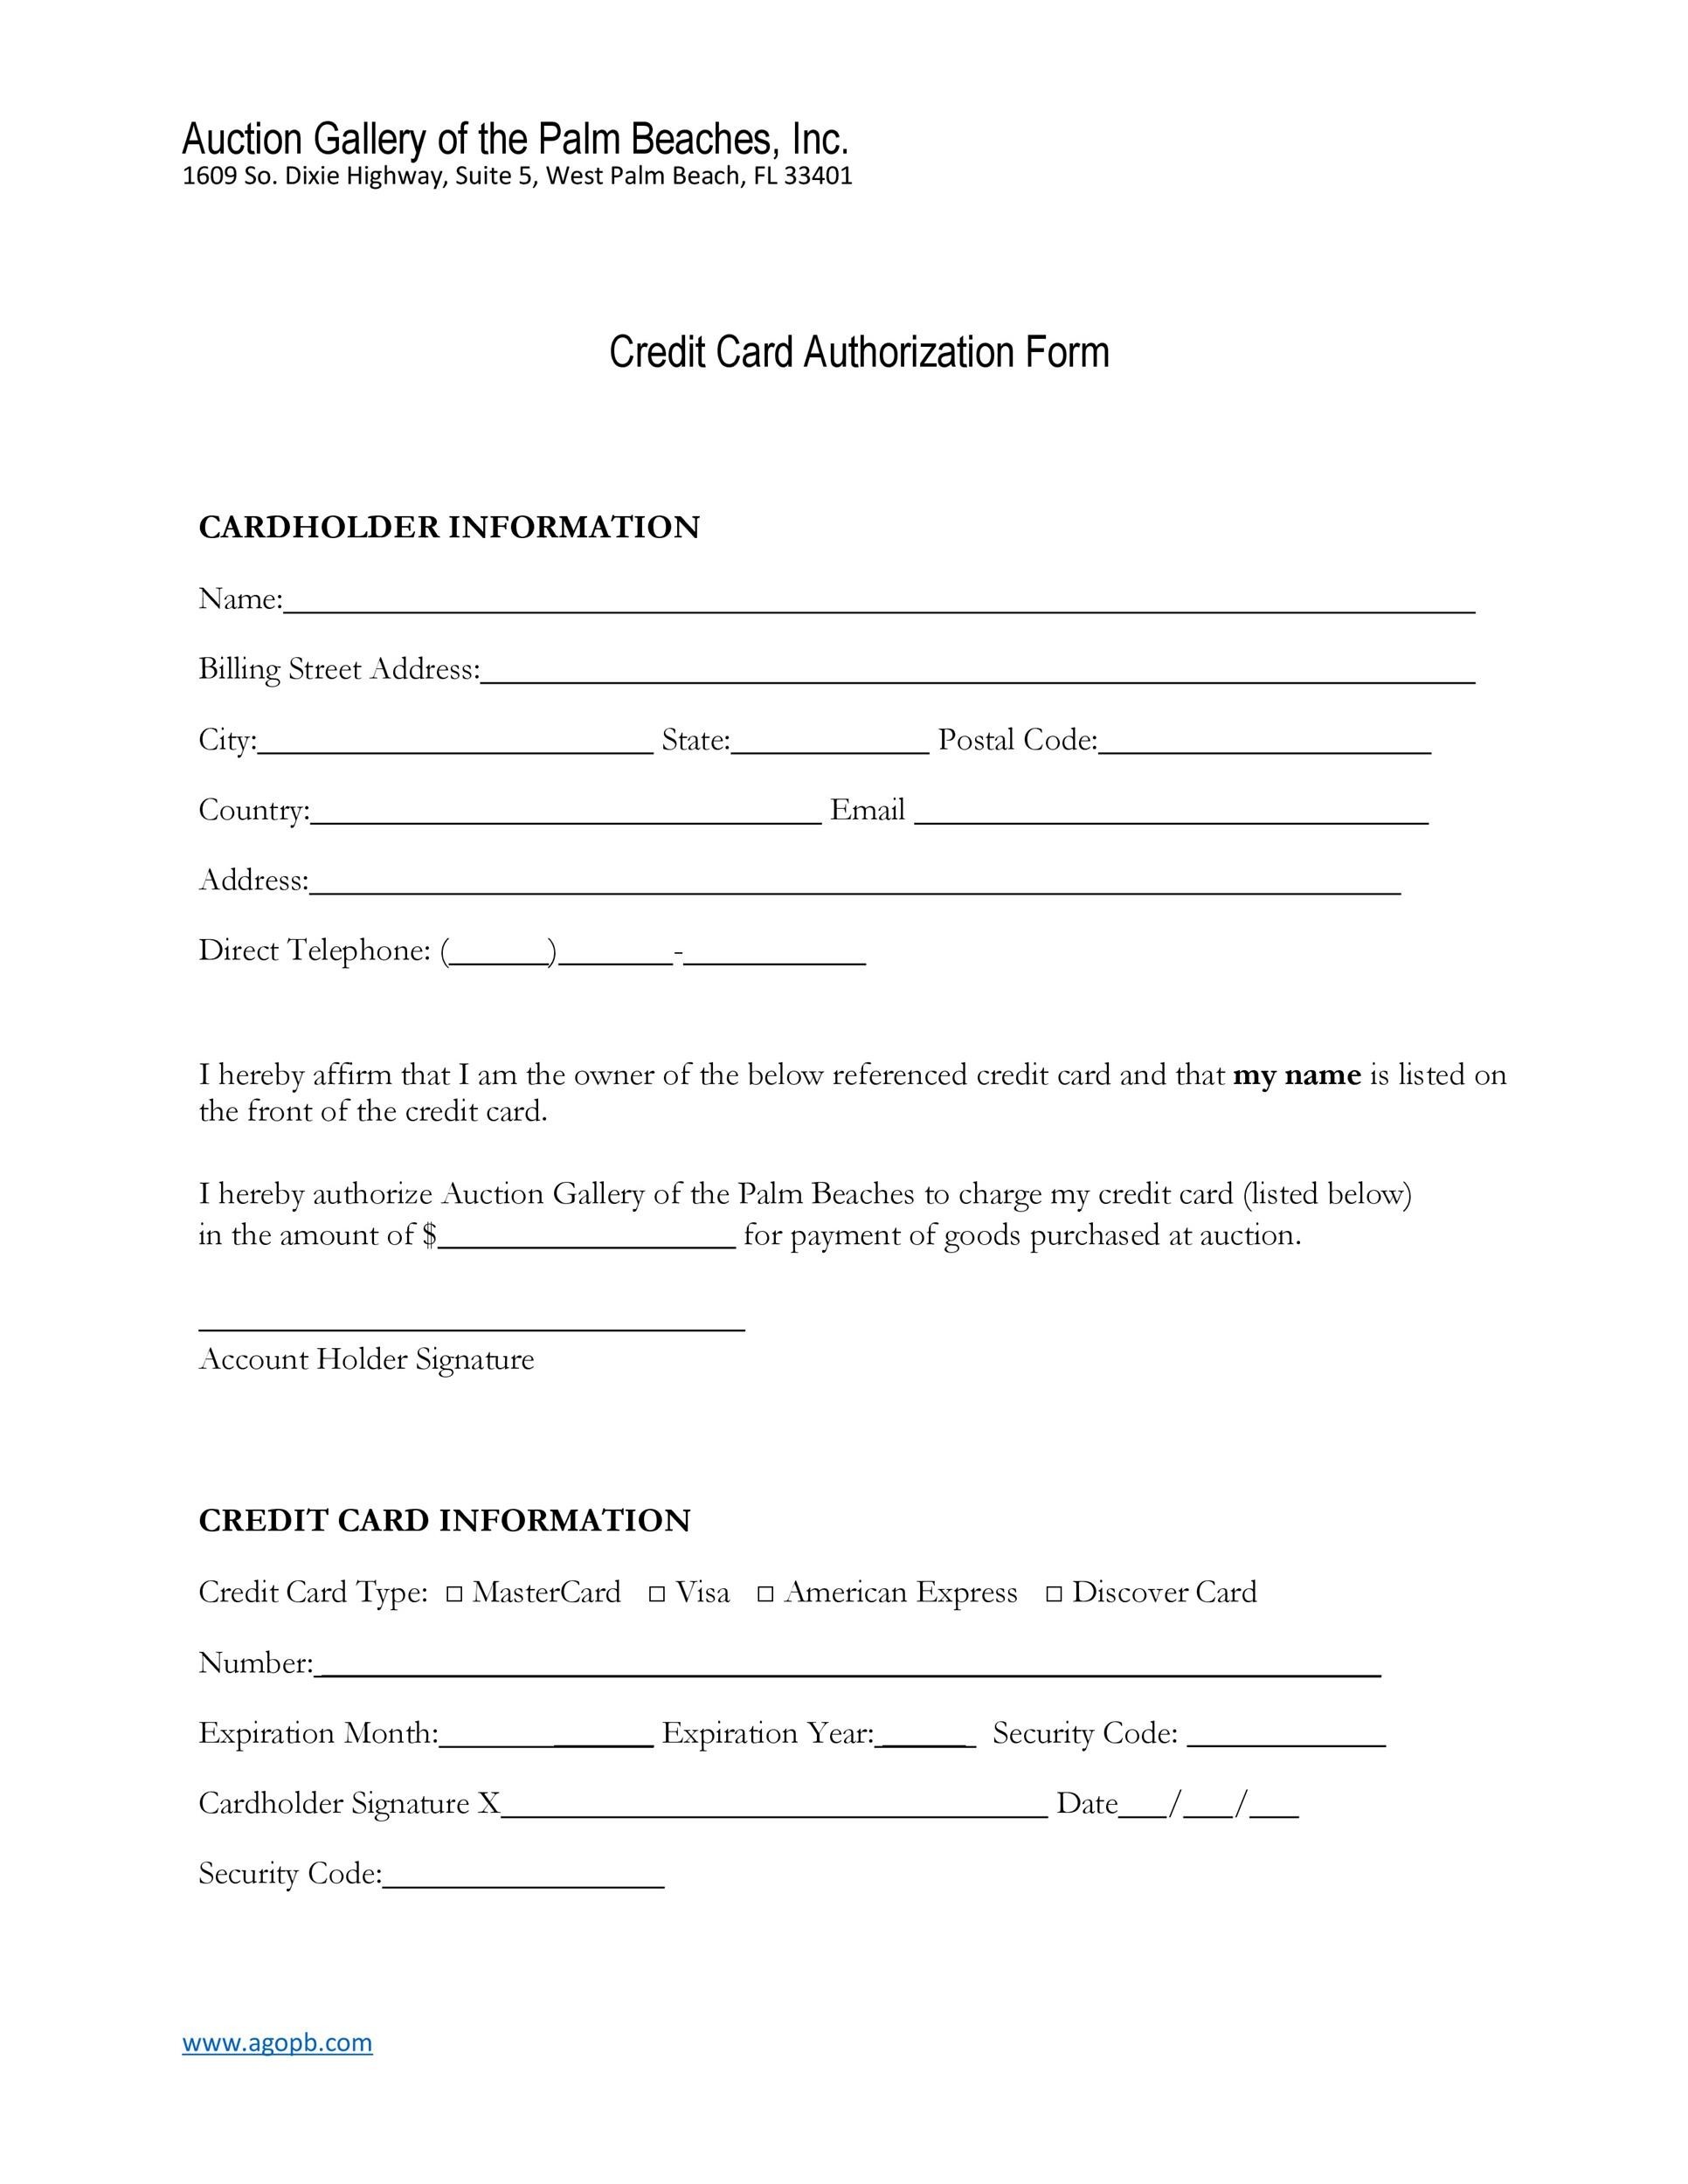 43 Credit Card Authorization Forms Templates Ready To Use